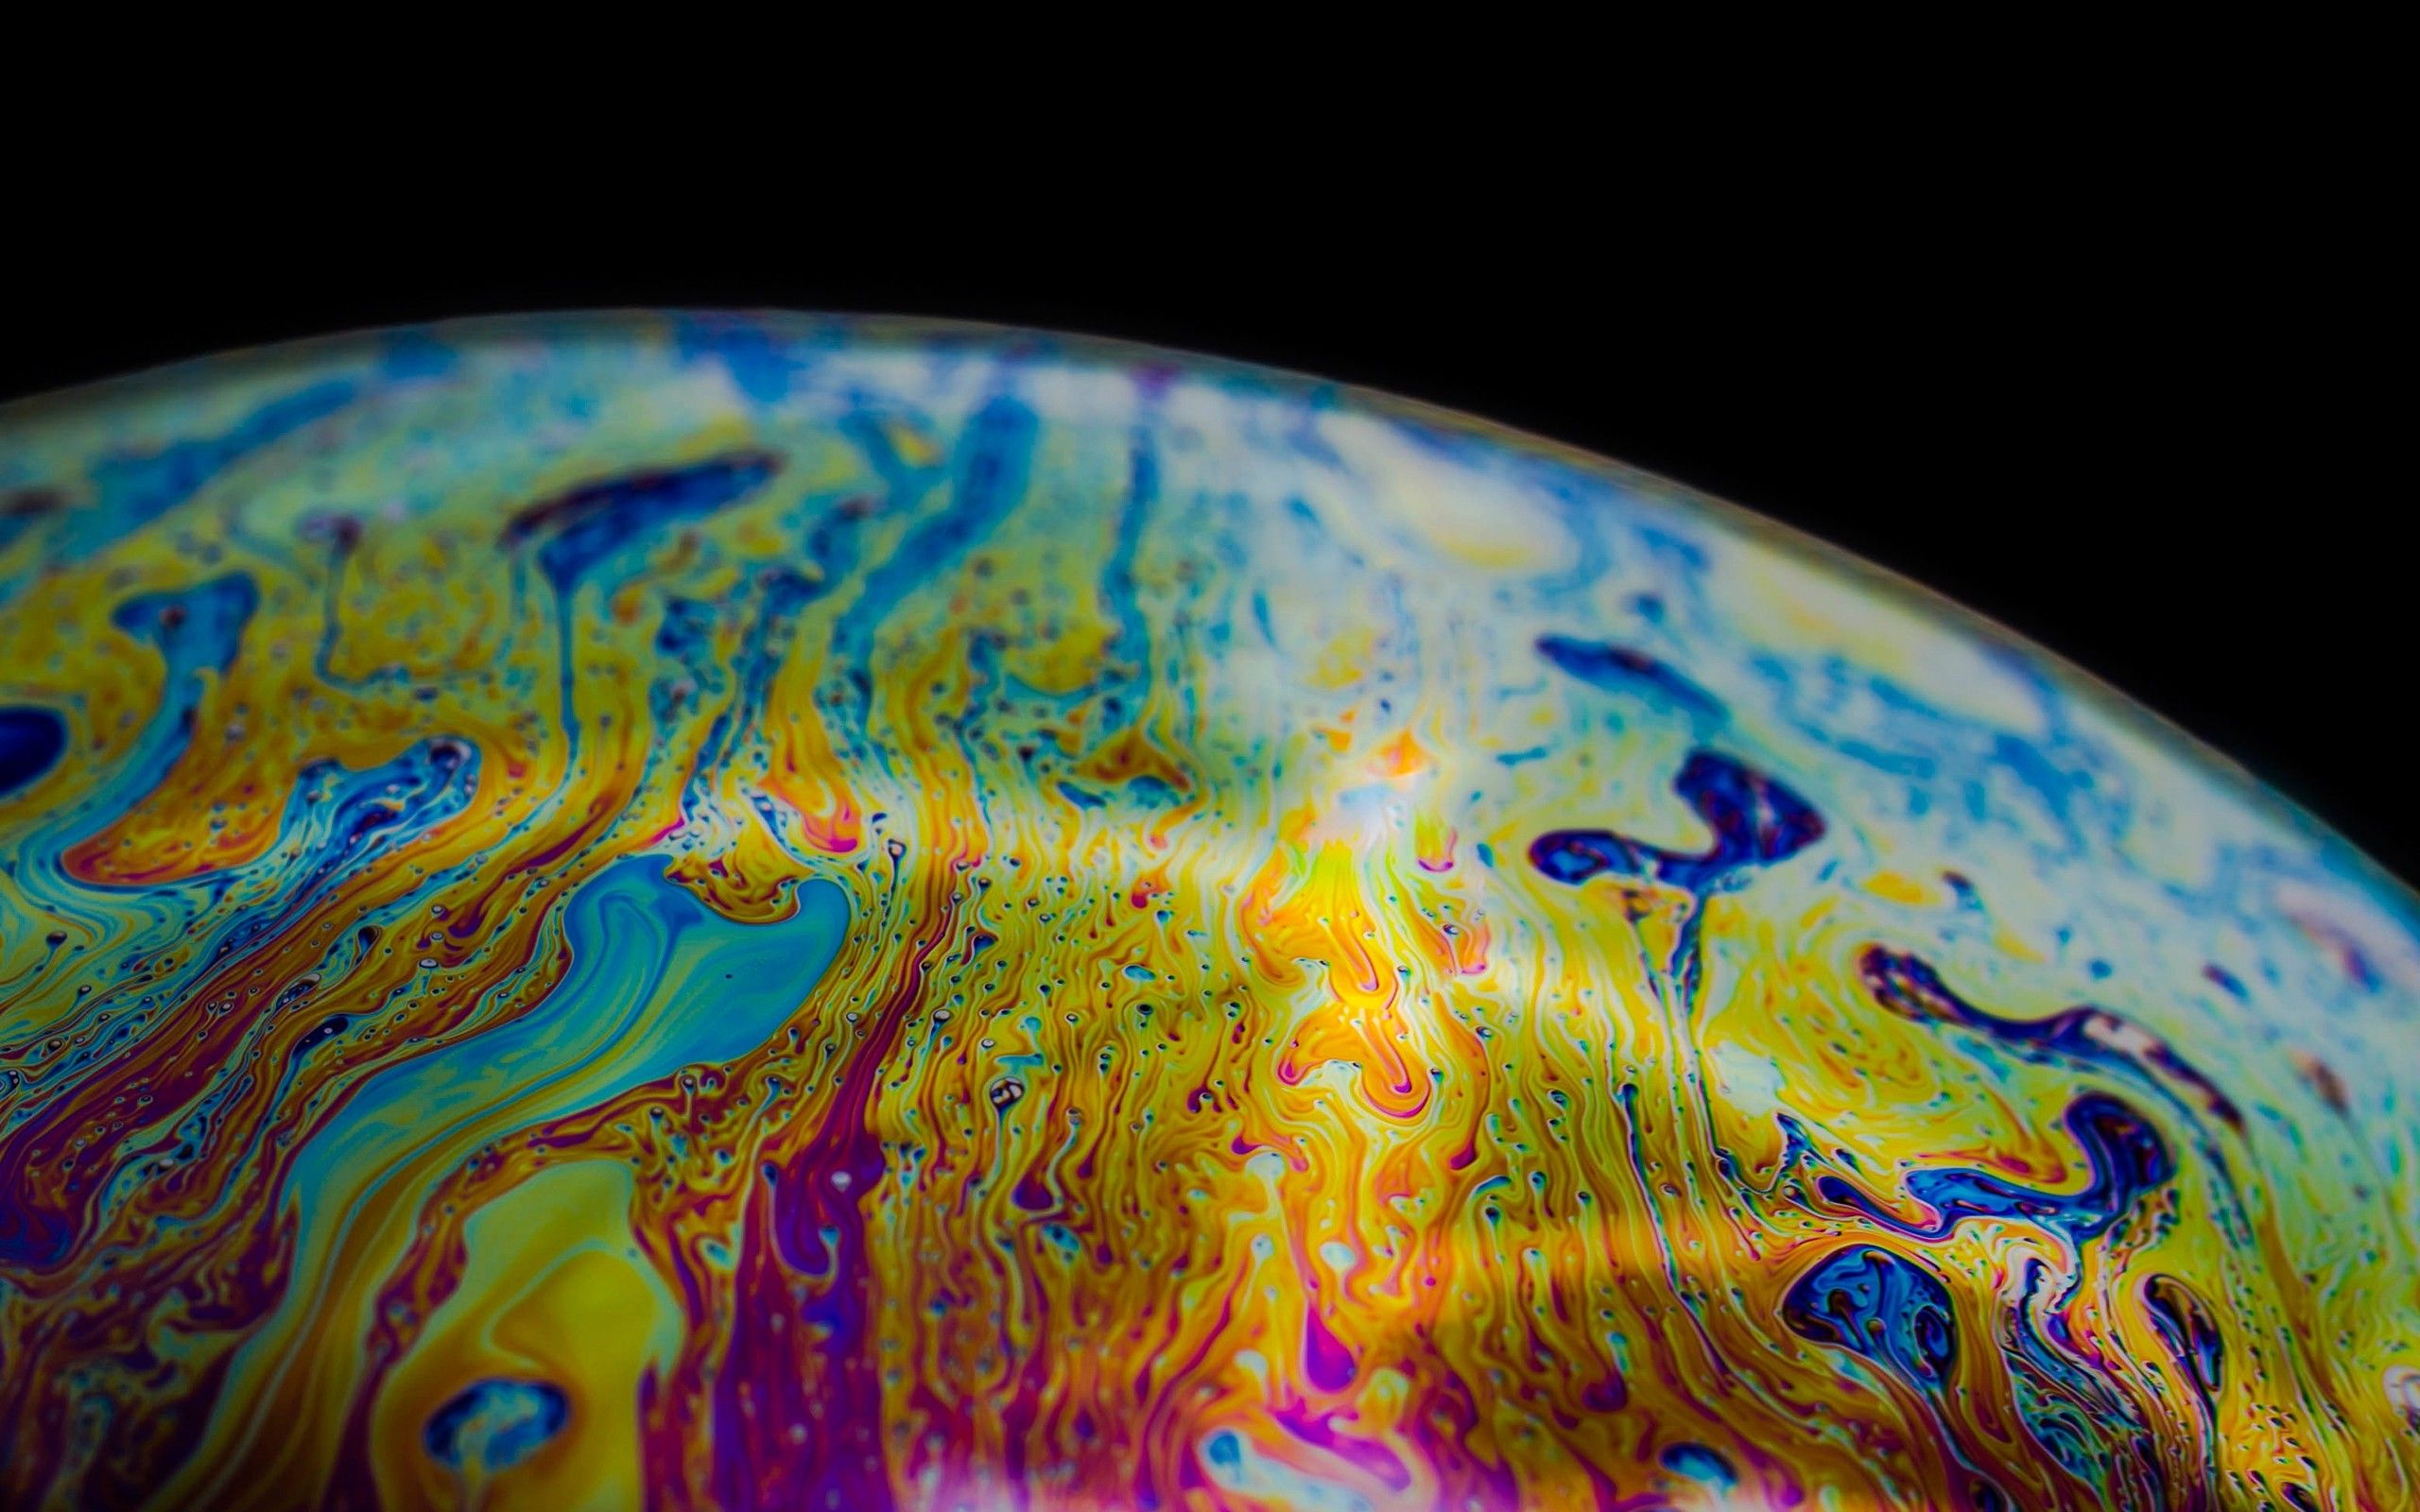 soap, Bubbles, Macro, Abstract, Colorful, Photography, Black ...